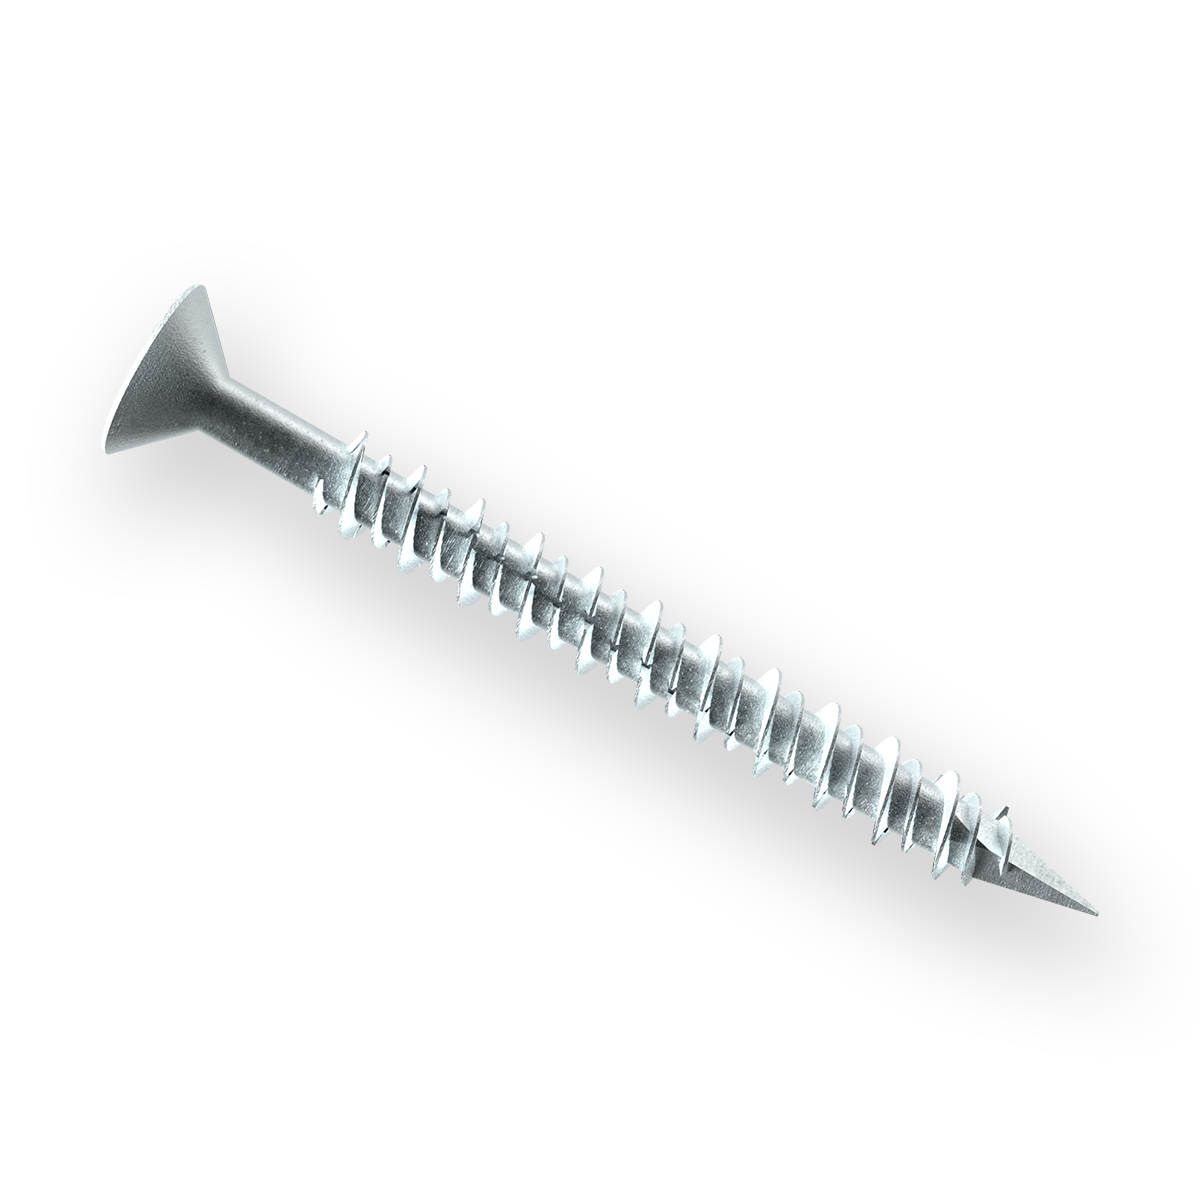 Wej-Con™ Concrete Screws- Flat Head: 410 Stainless Steel with SIlver R-Blocker Coating Mechanical Anchors Wej-It